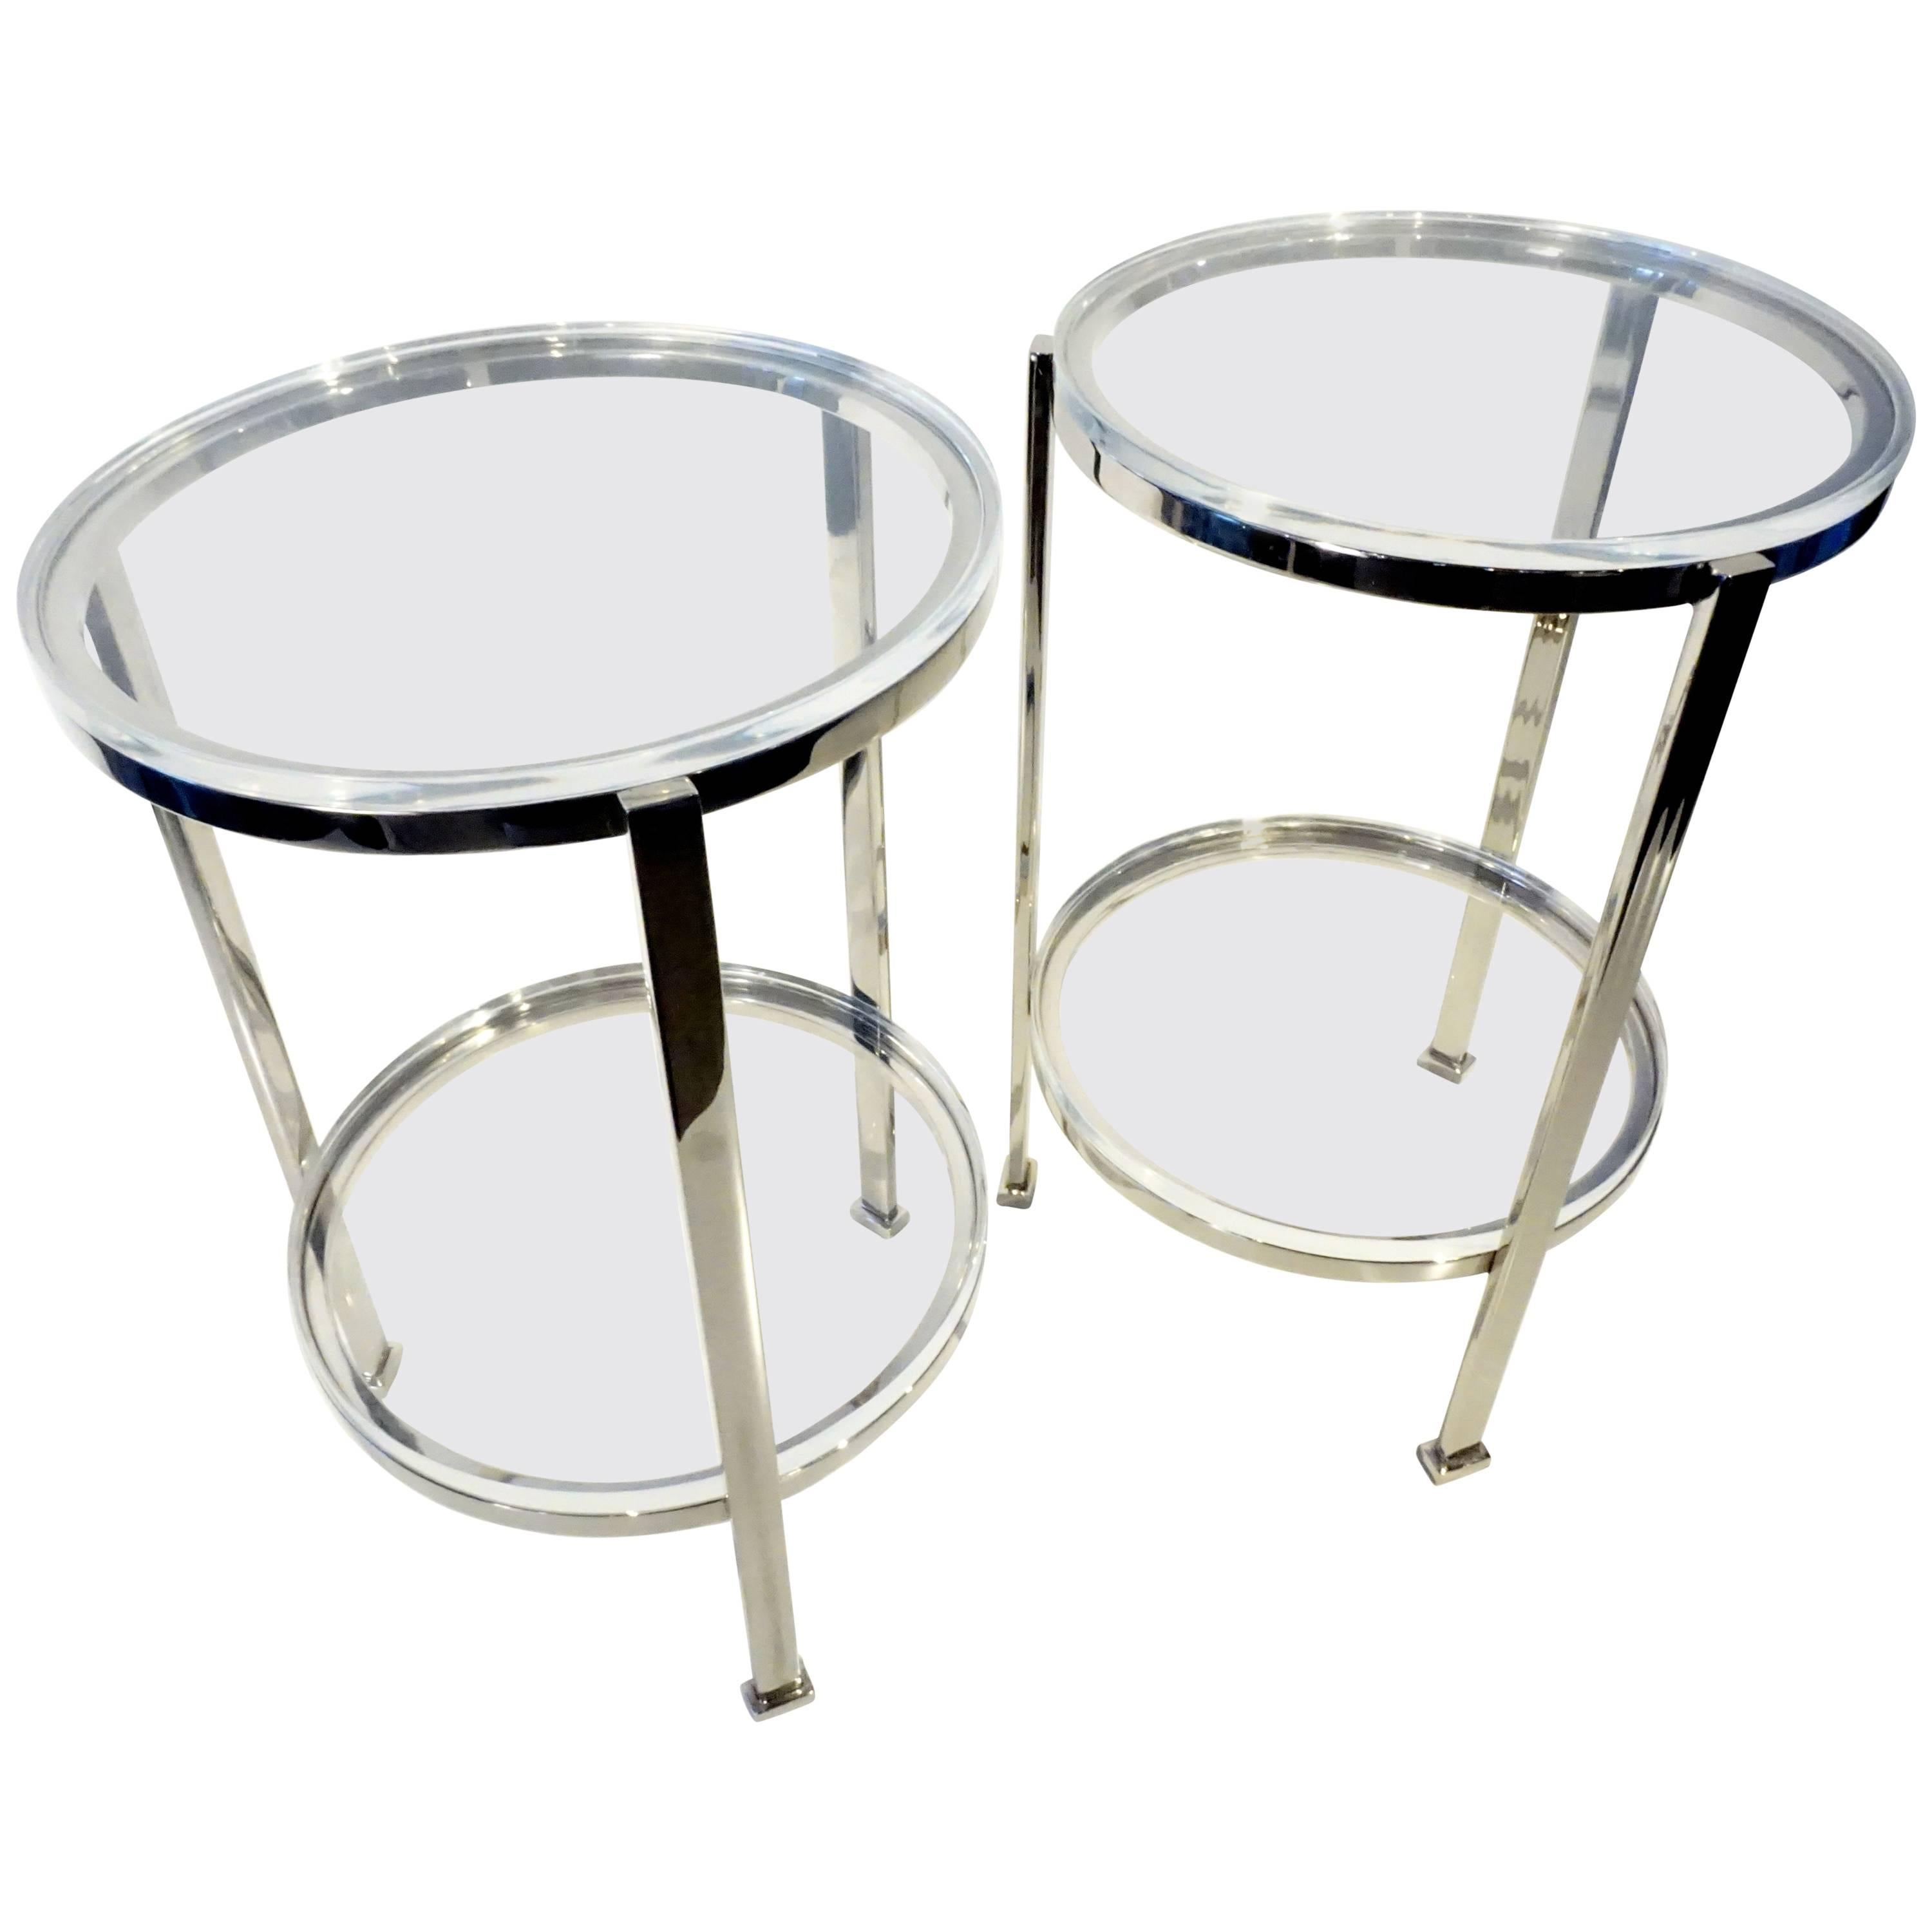 Pair of Two-Tier Circular Side Tables Custom-Made by Charles Hollis Jones For Sale